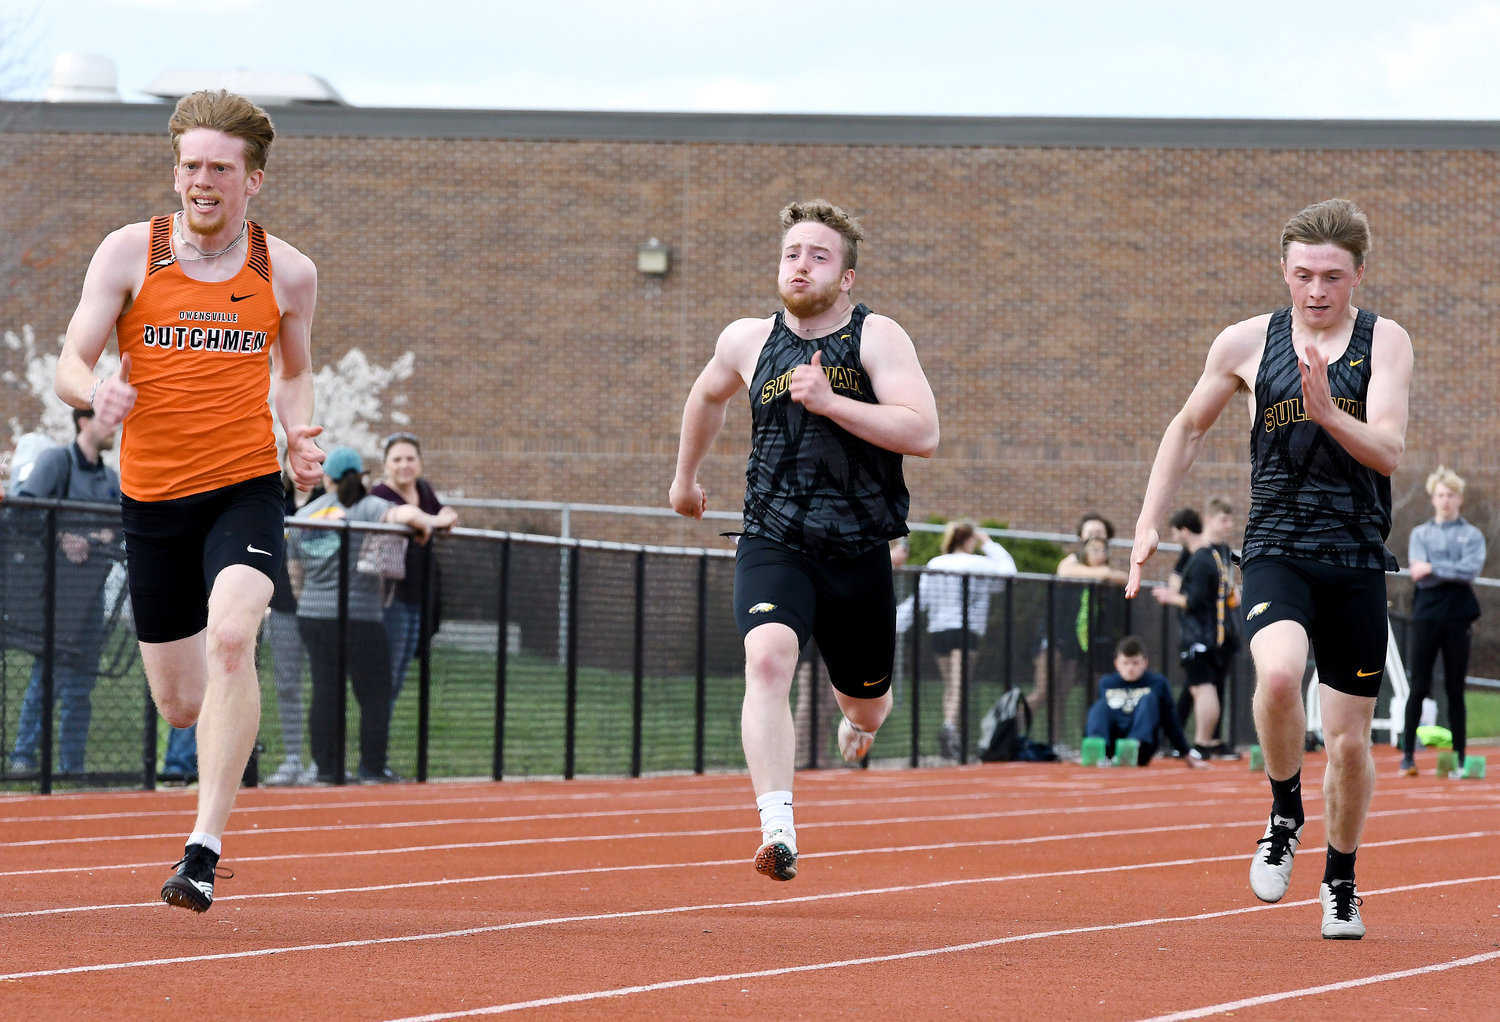 Charlie Whelan (far left) sprints ahead of a pair of Sullivan Eagles during one of several heats of the boys 100-meter dash in last Tuesday’s home track meet at Dutchmen Field. Due to Good Friday, the annual OHS Relays will be held tomorrow (Thursday) and return to its traditional Friday slot next year.